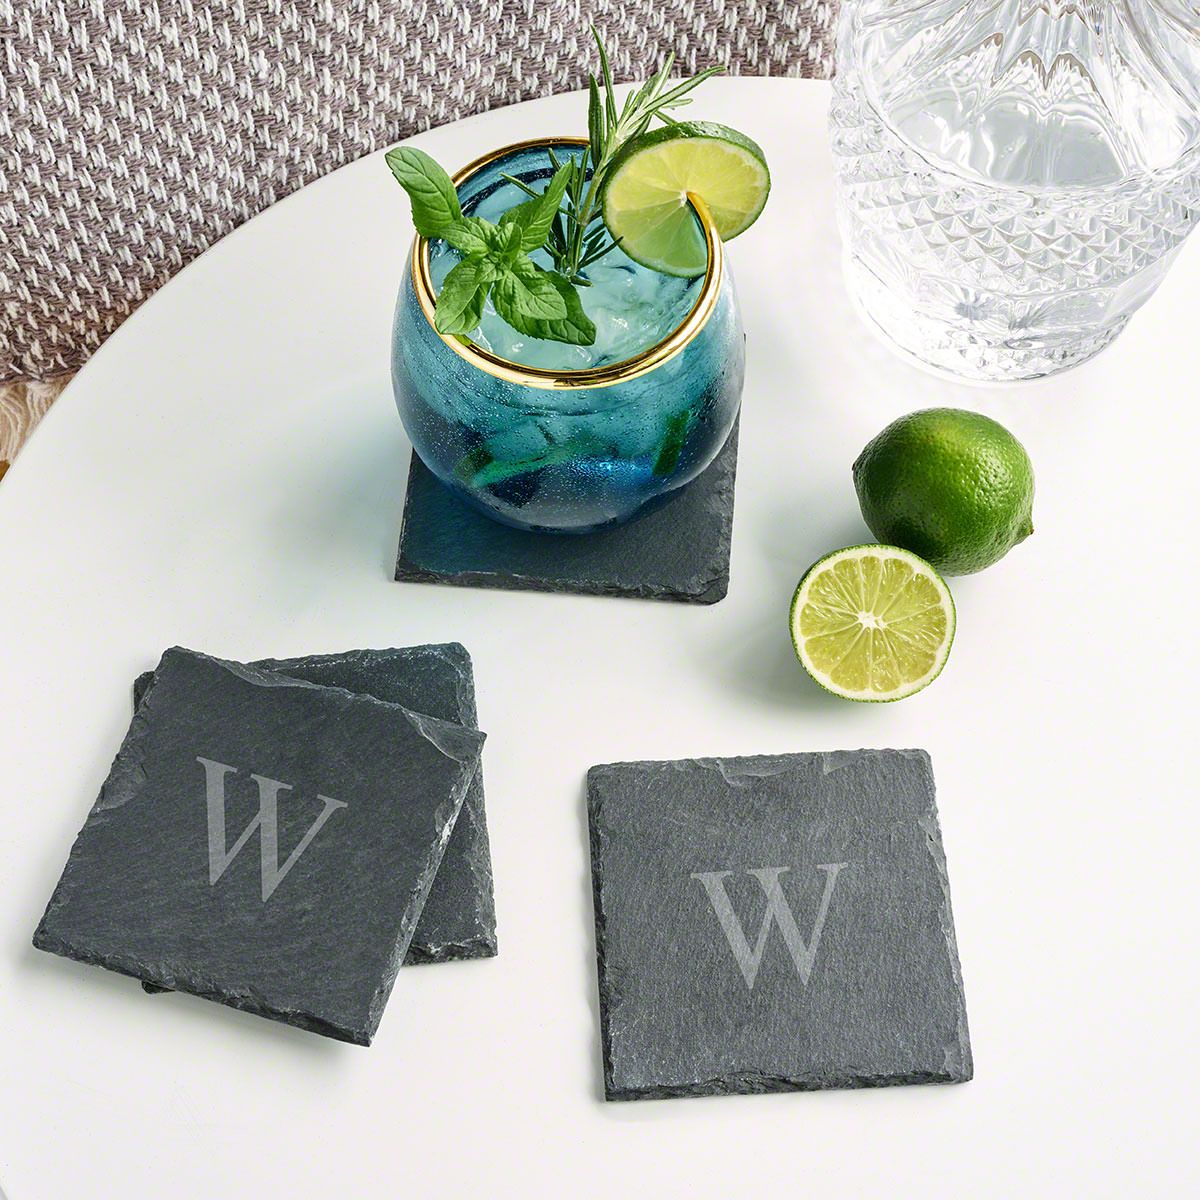 Franklin Personalized Slate Coasters, Set of 4